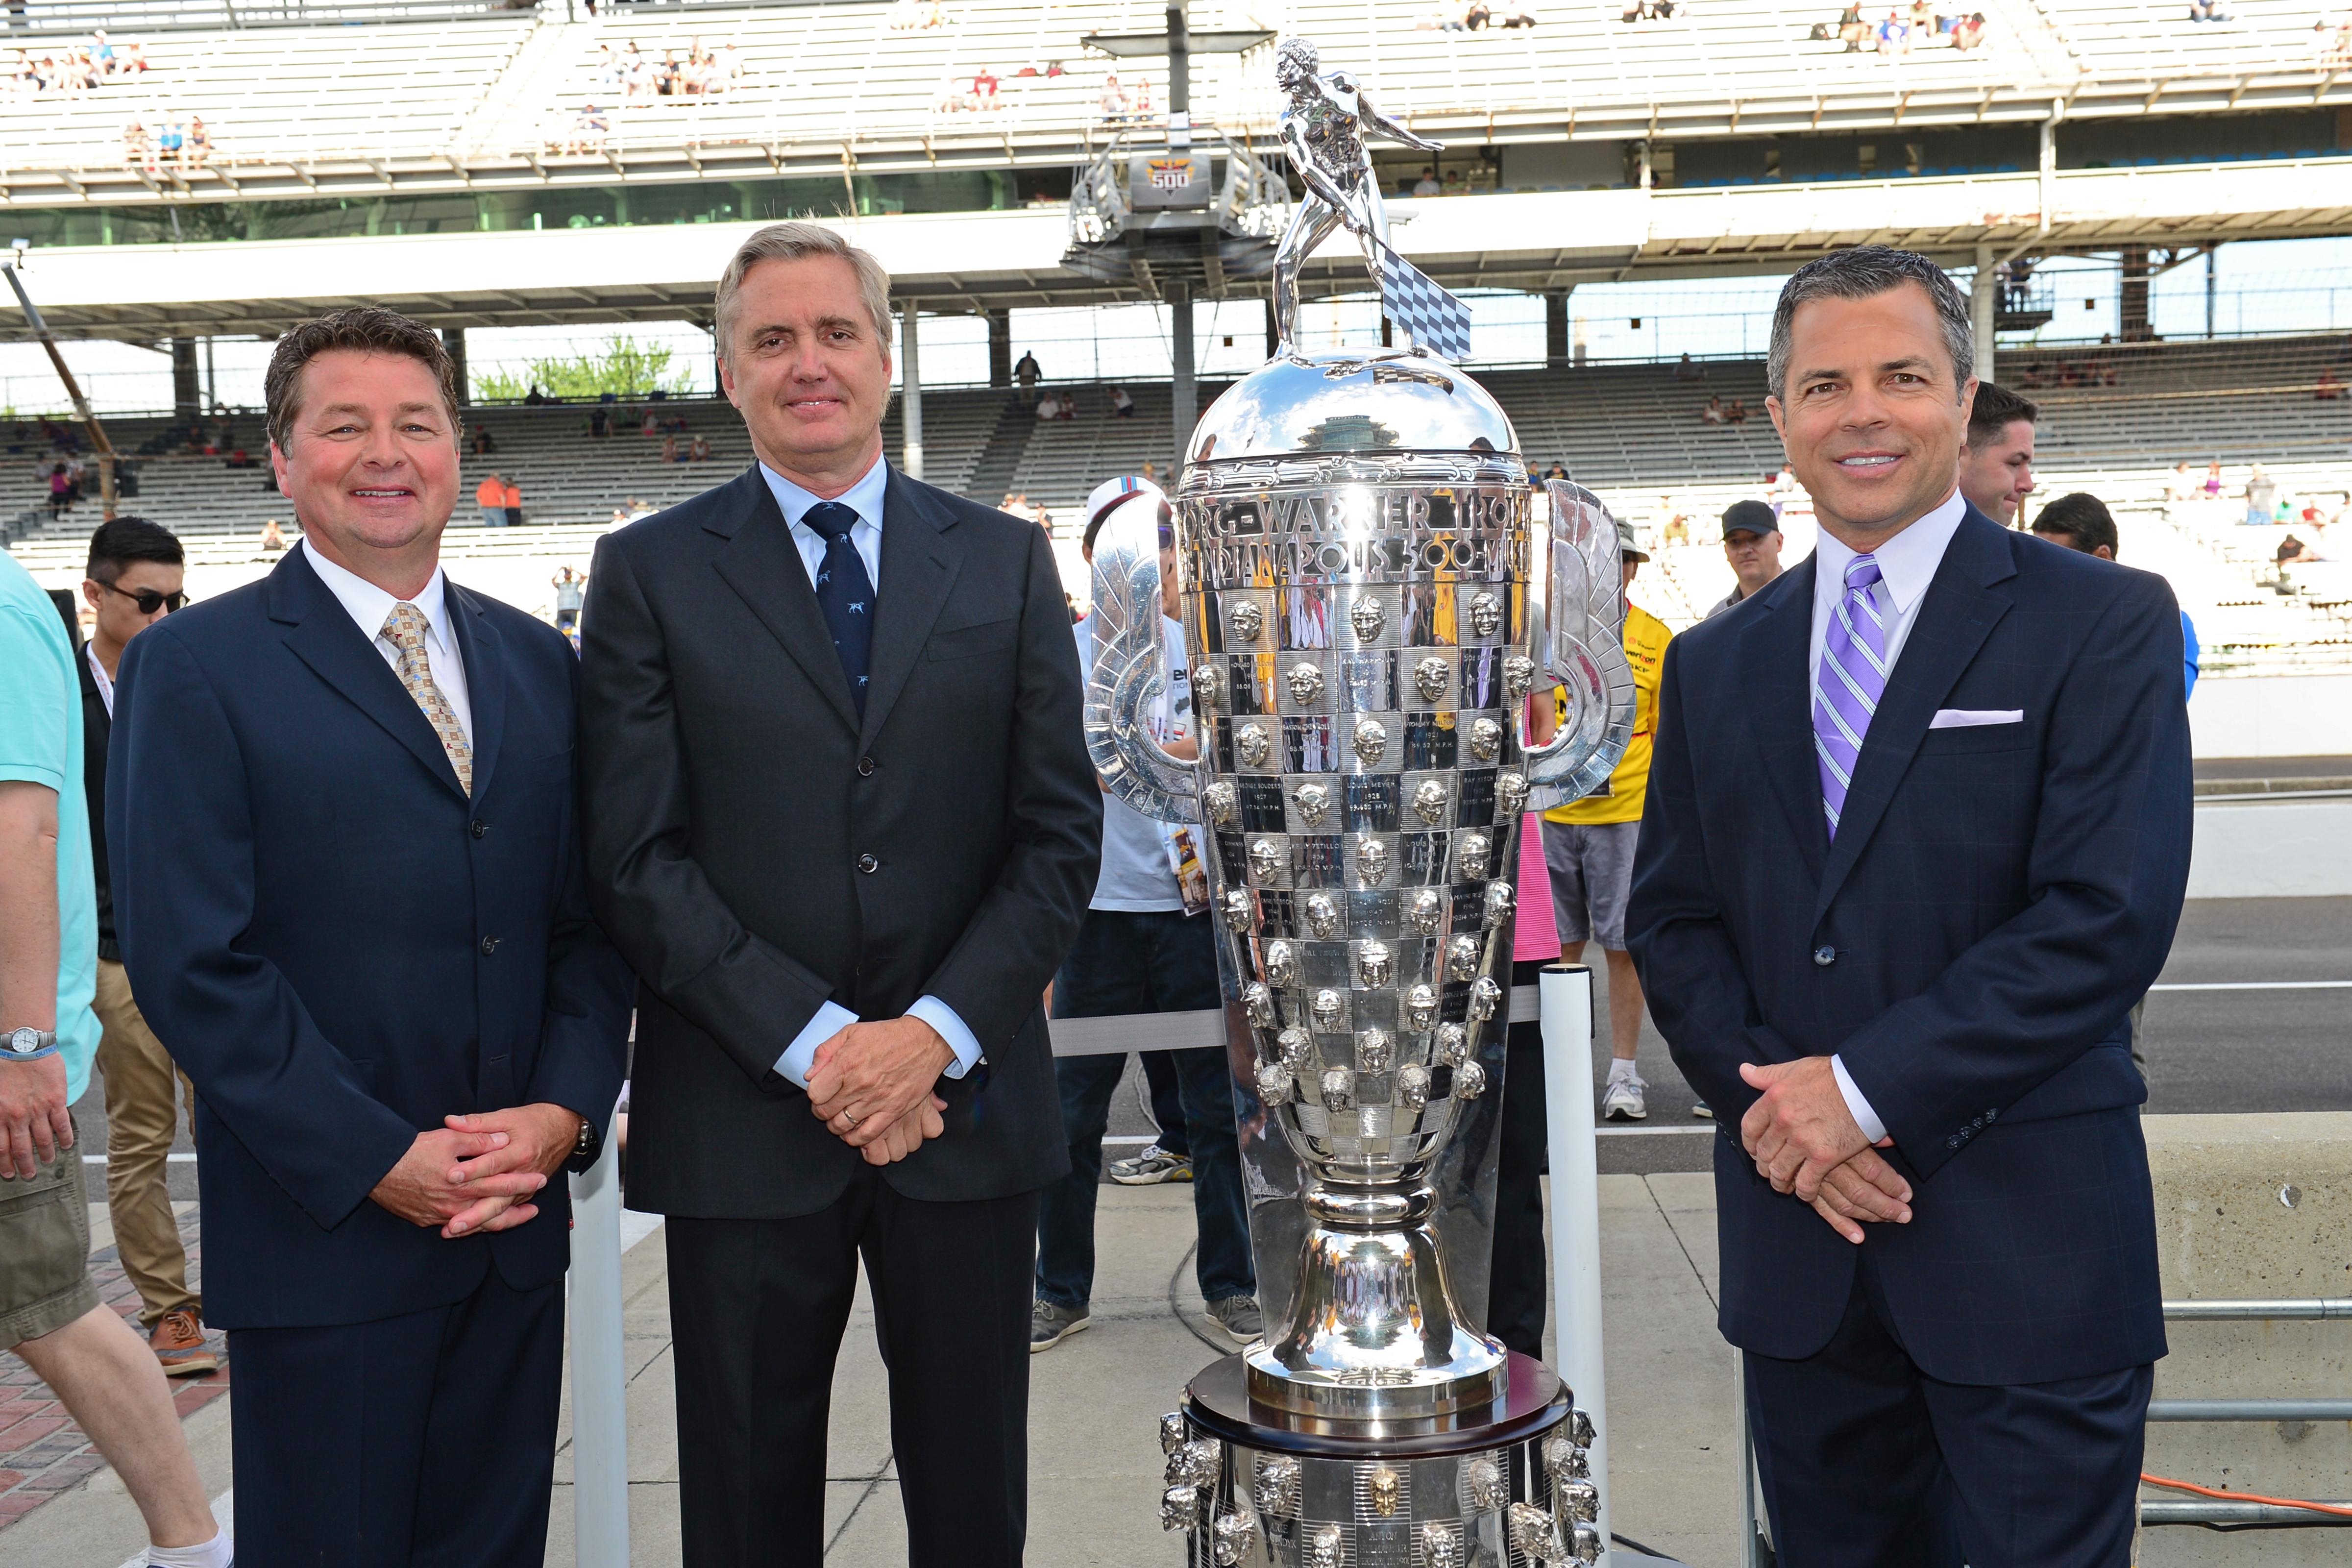 (L-R) Scott Goodyear, Eddie Cheever and Allen Bestwick  with the in the Borg-Warner Trophy at the 98th Indianapolis 500 (Phil Ellsworth/ESPN Images)